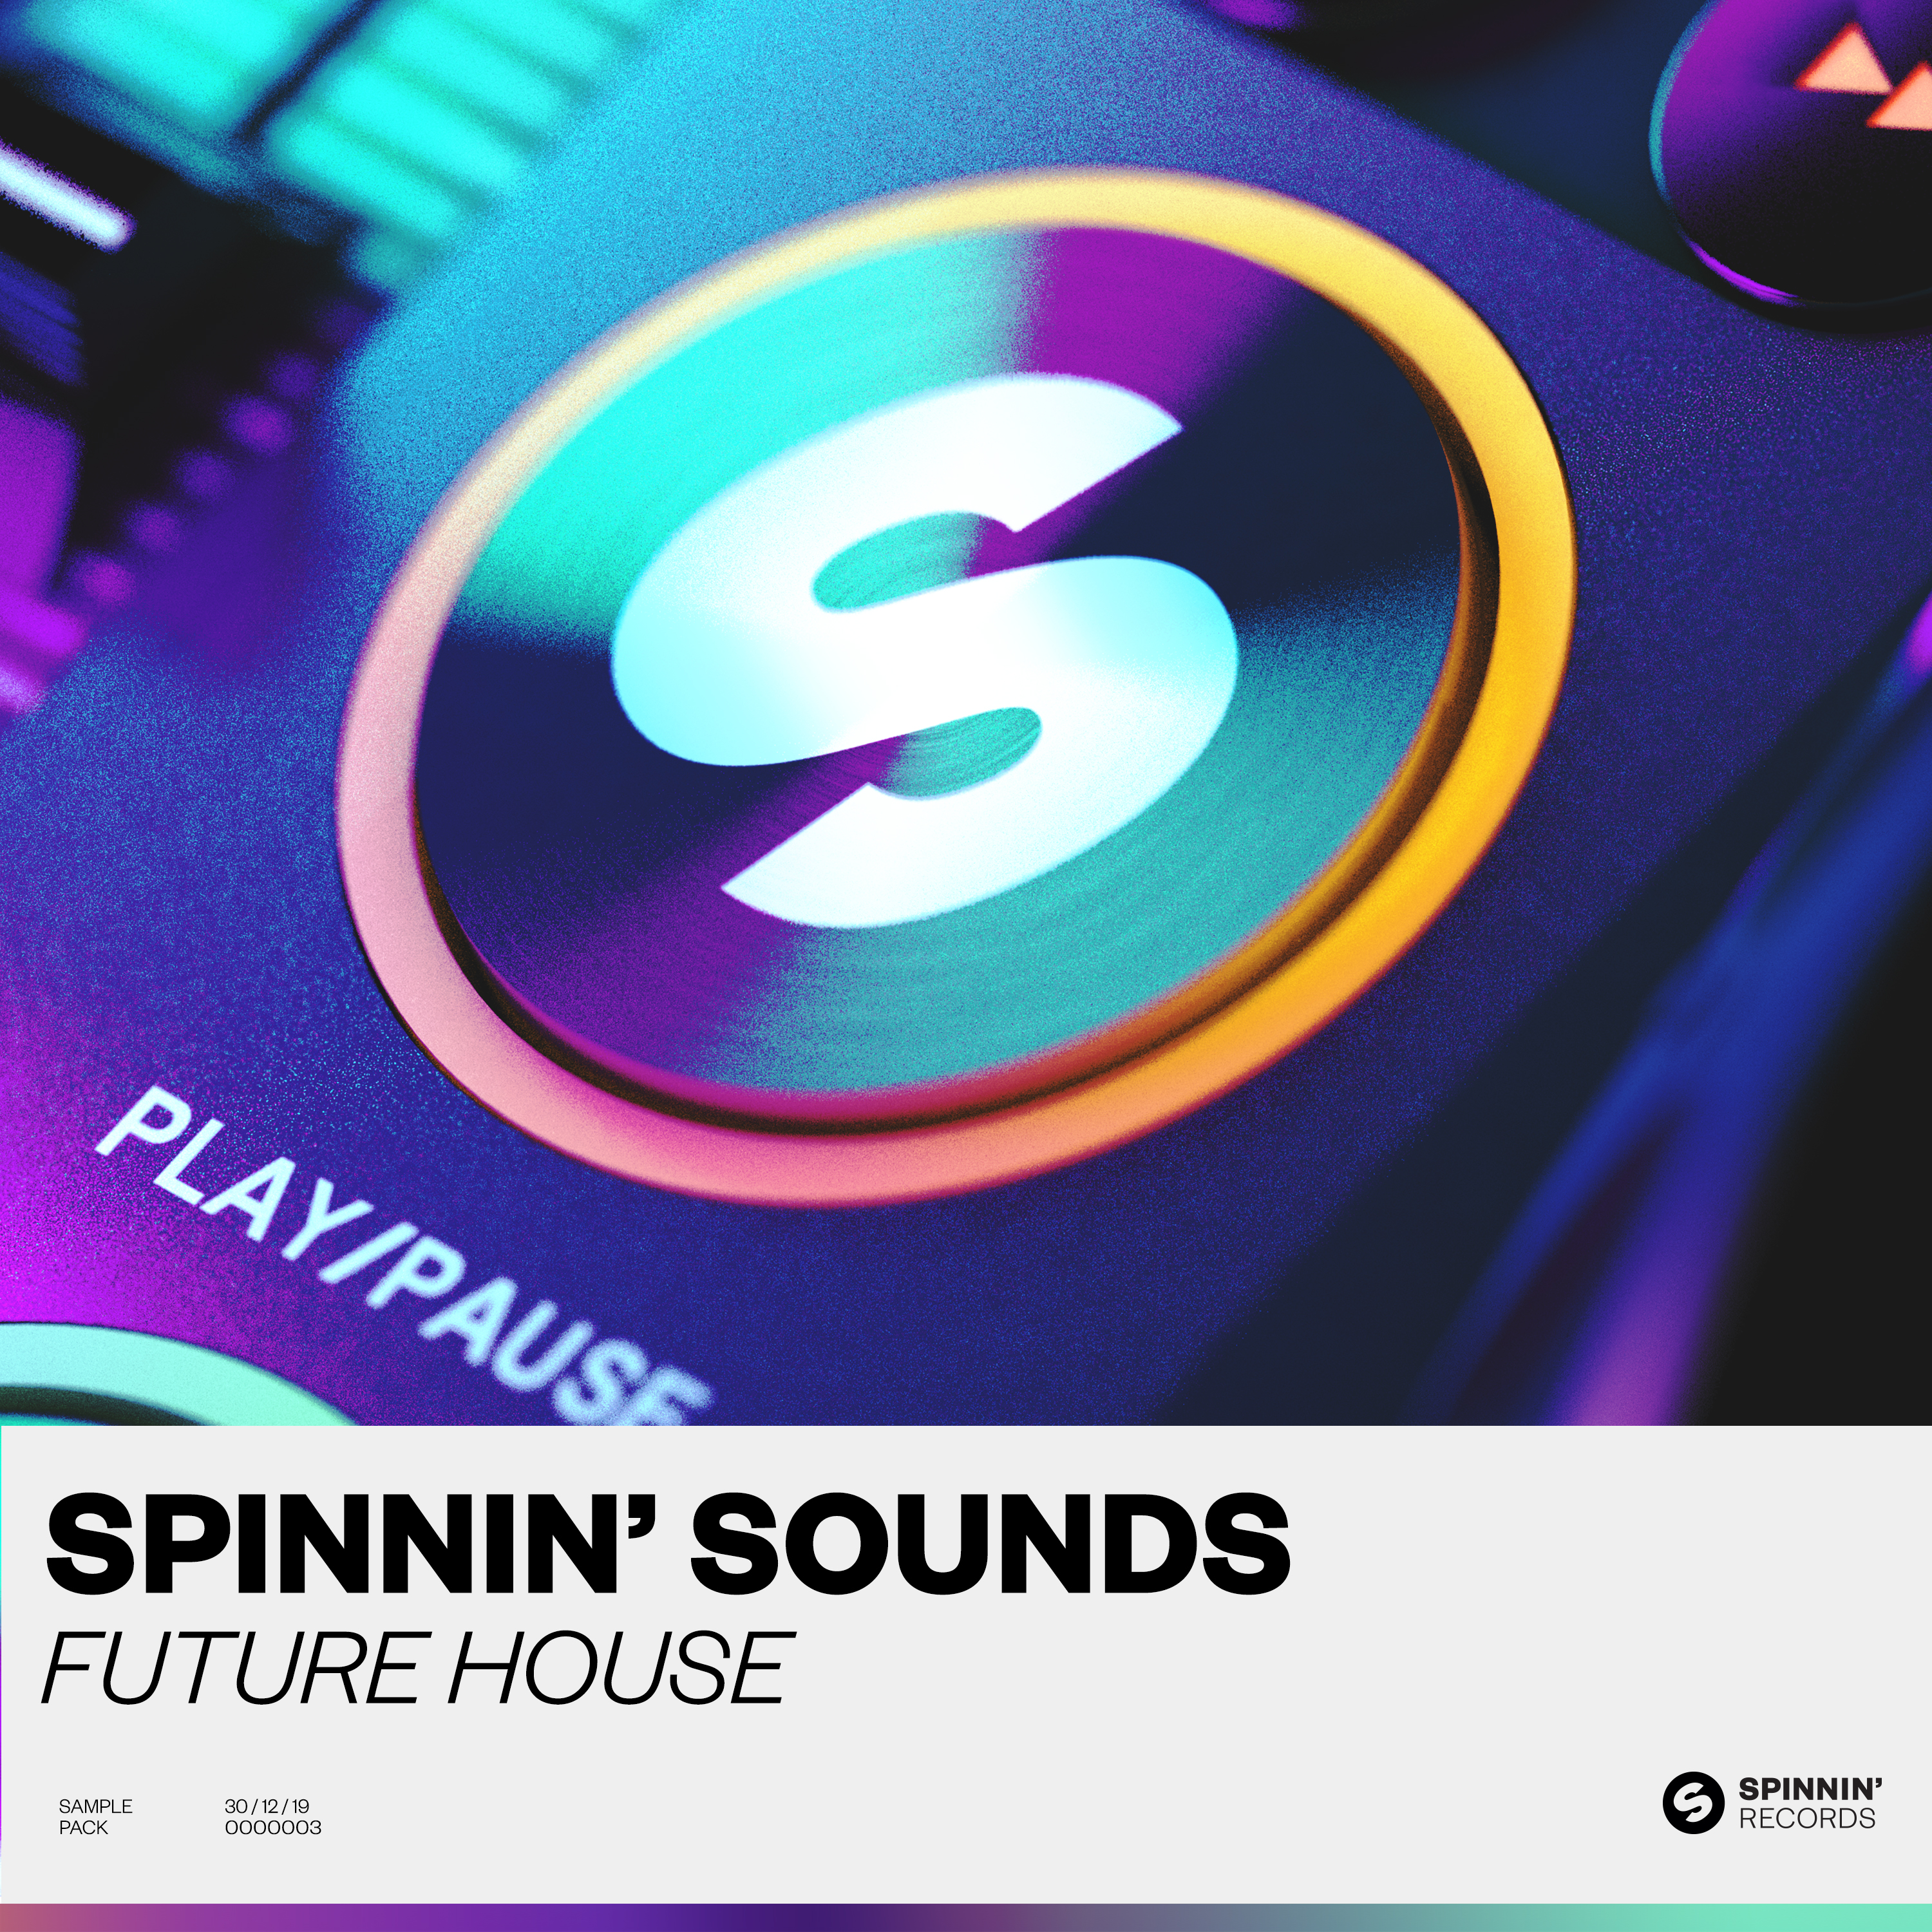 Spinnin' Records with 2 sample packs in Splice top 10!